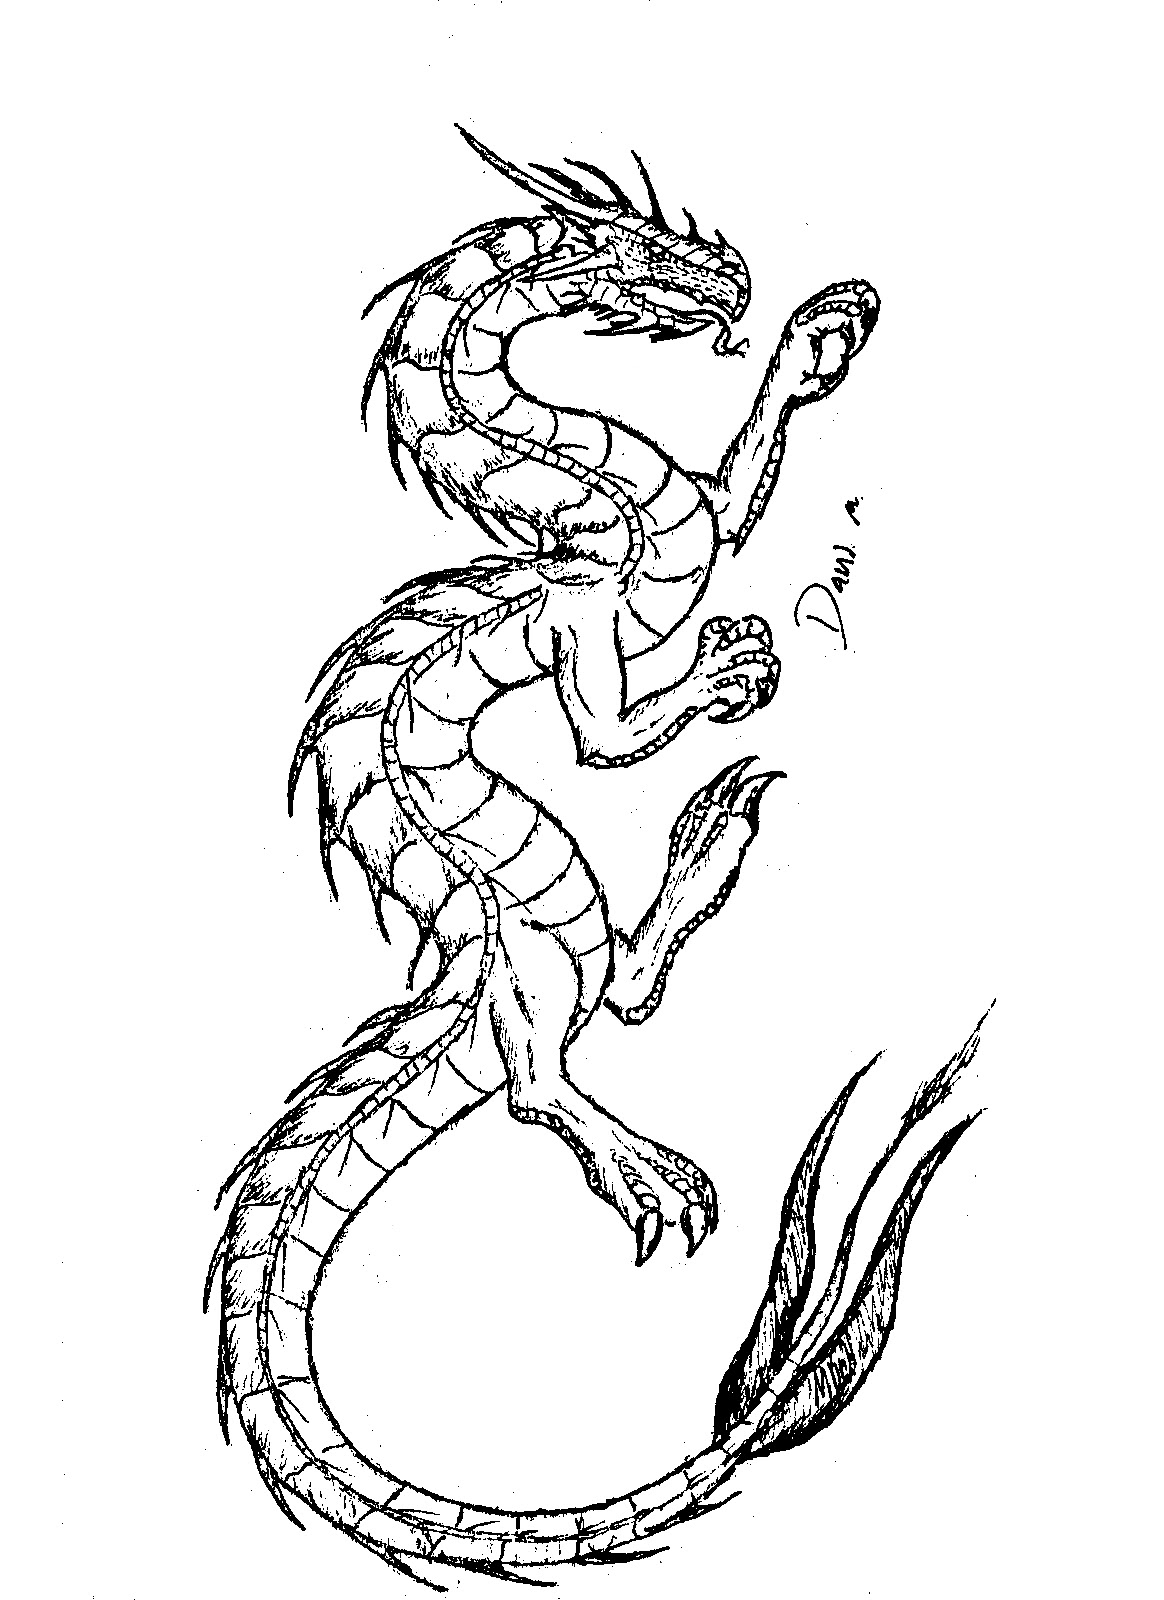 Download Coloring Page World: Tattoo Dragon (Portrait)